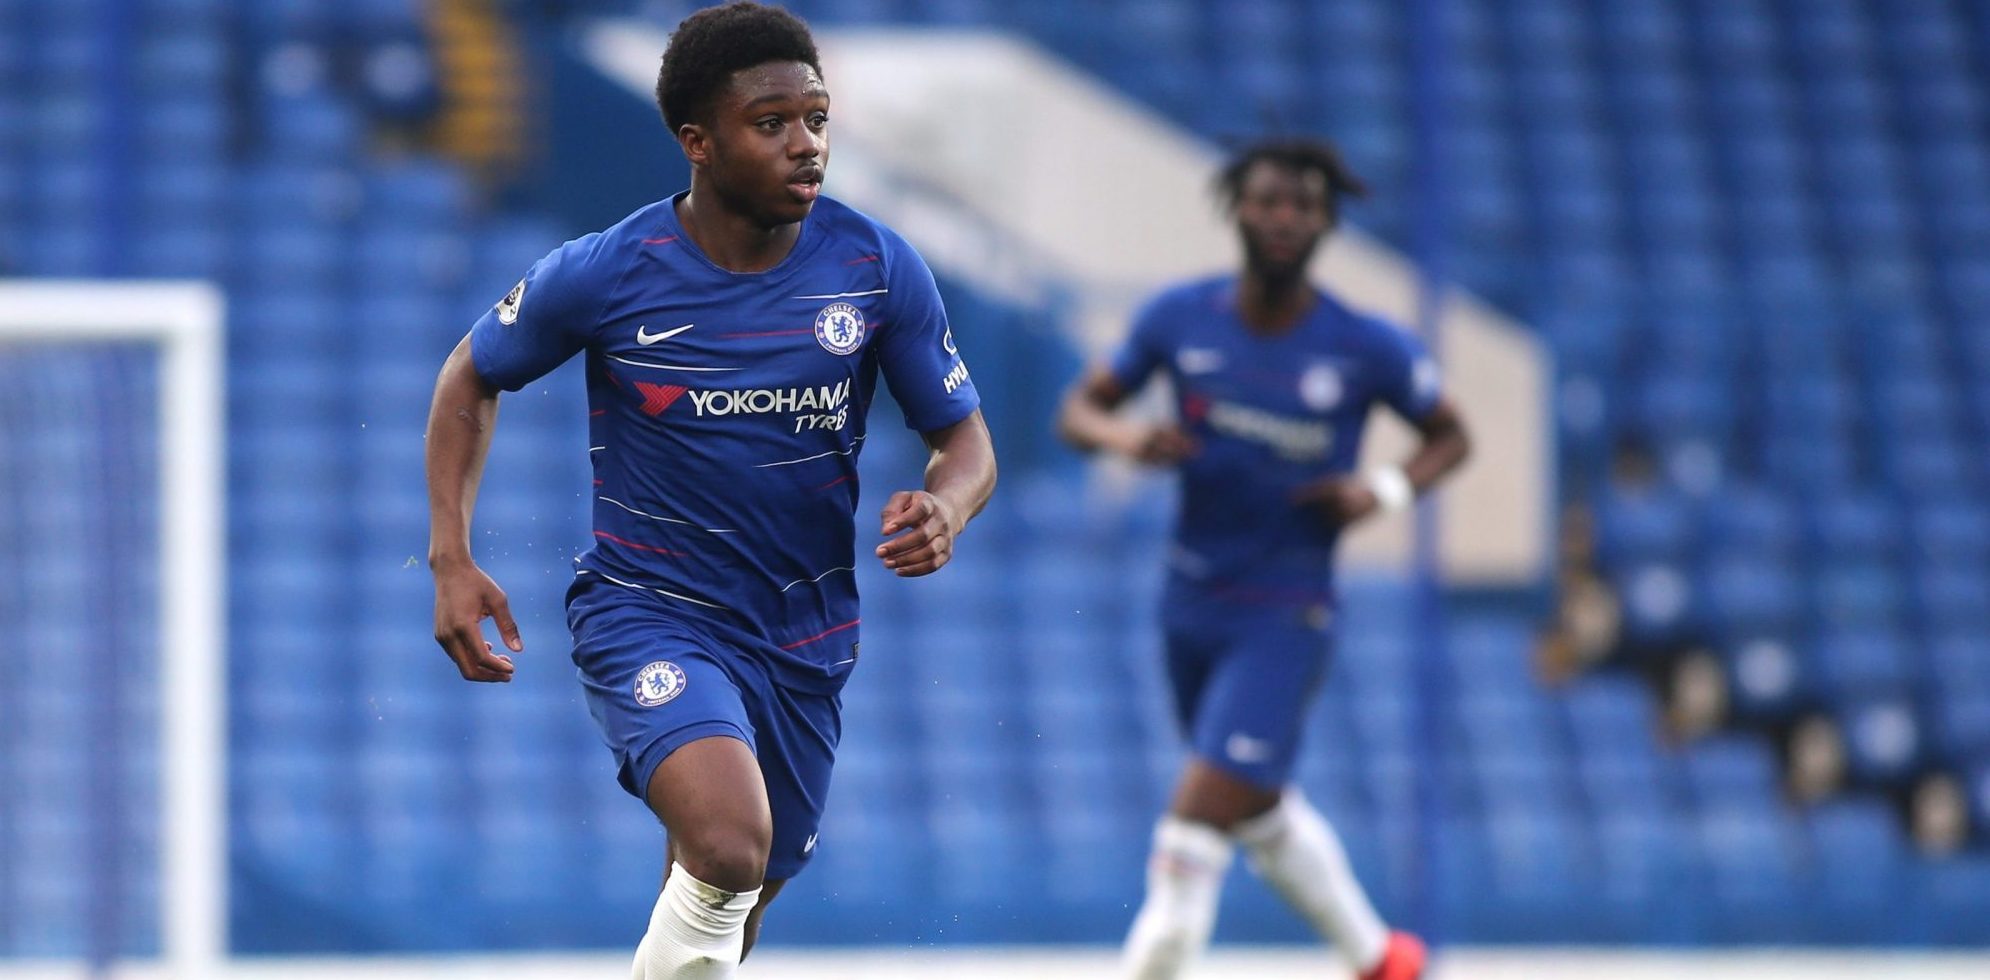 Chelsea U23s extend unbeaten record with comfortable victory